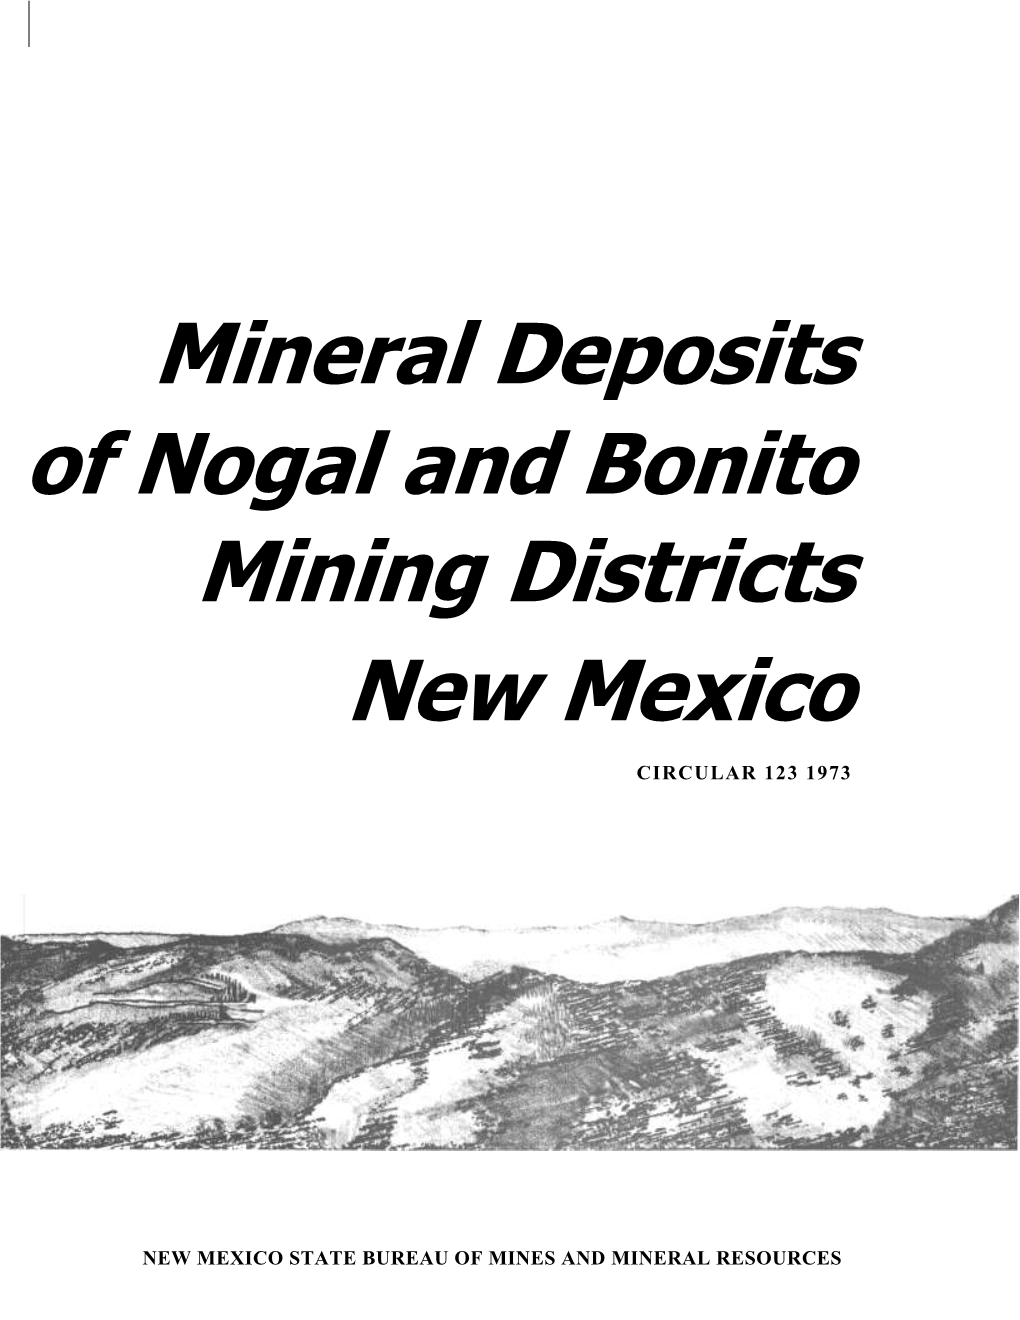 Mineral Deposits of Nogal and Bonito Mining Districts, New Mexico